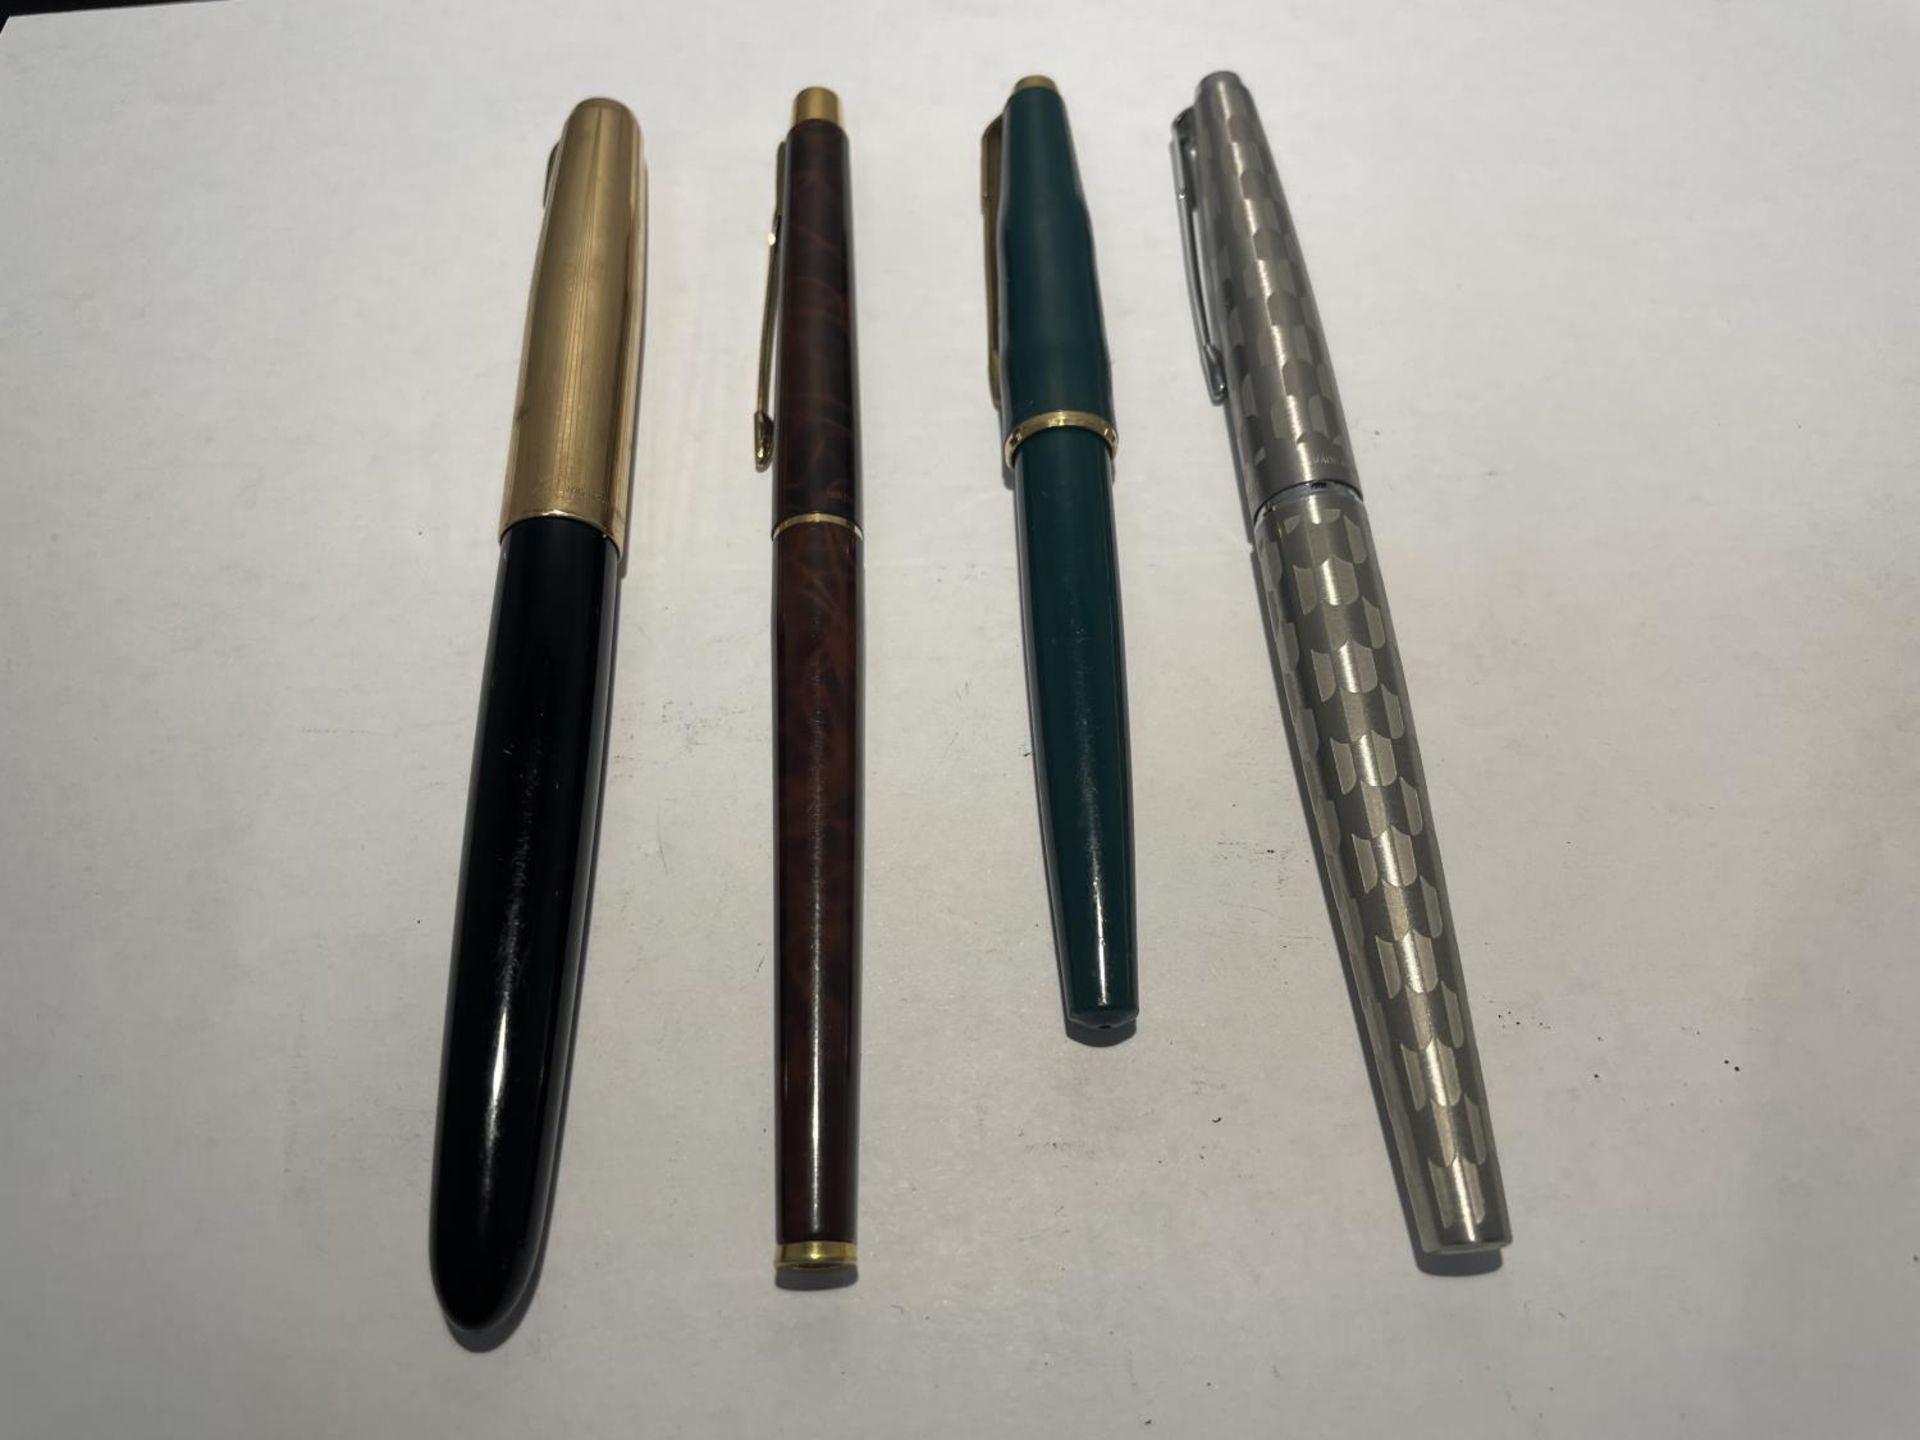 FOUR VINTAGE PARKER FOUNTAIN PENS WITH 14 CARAT GOLD NIBS